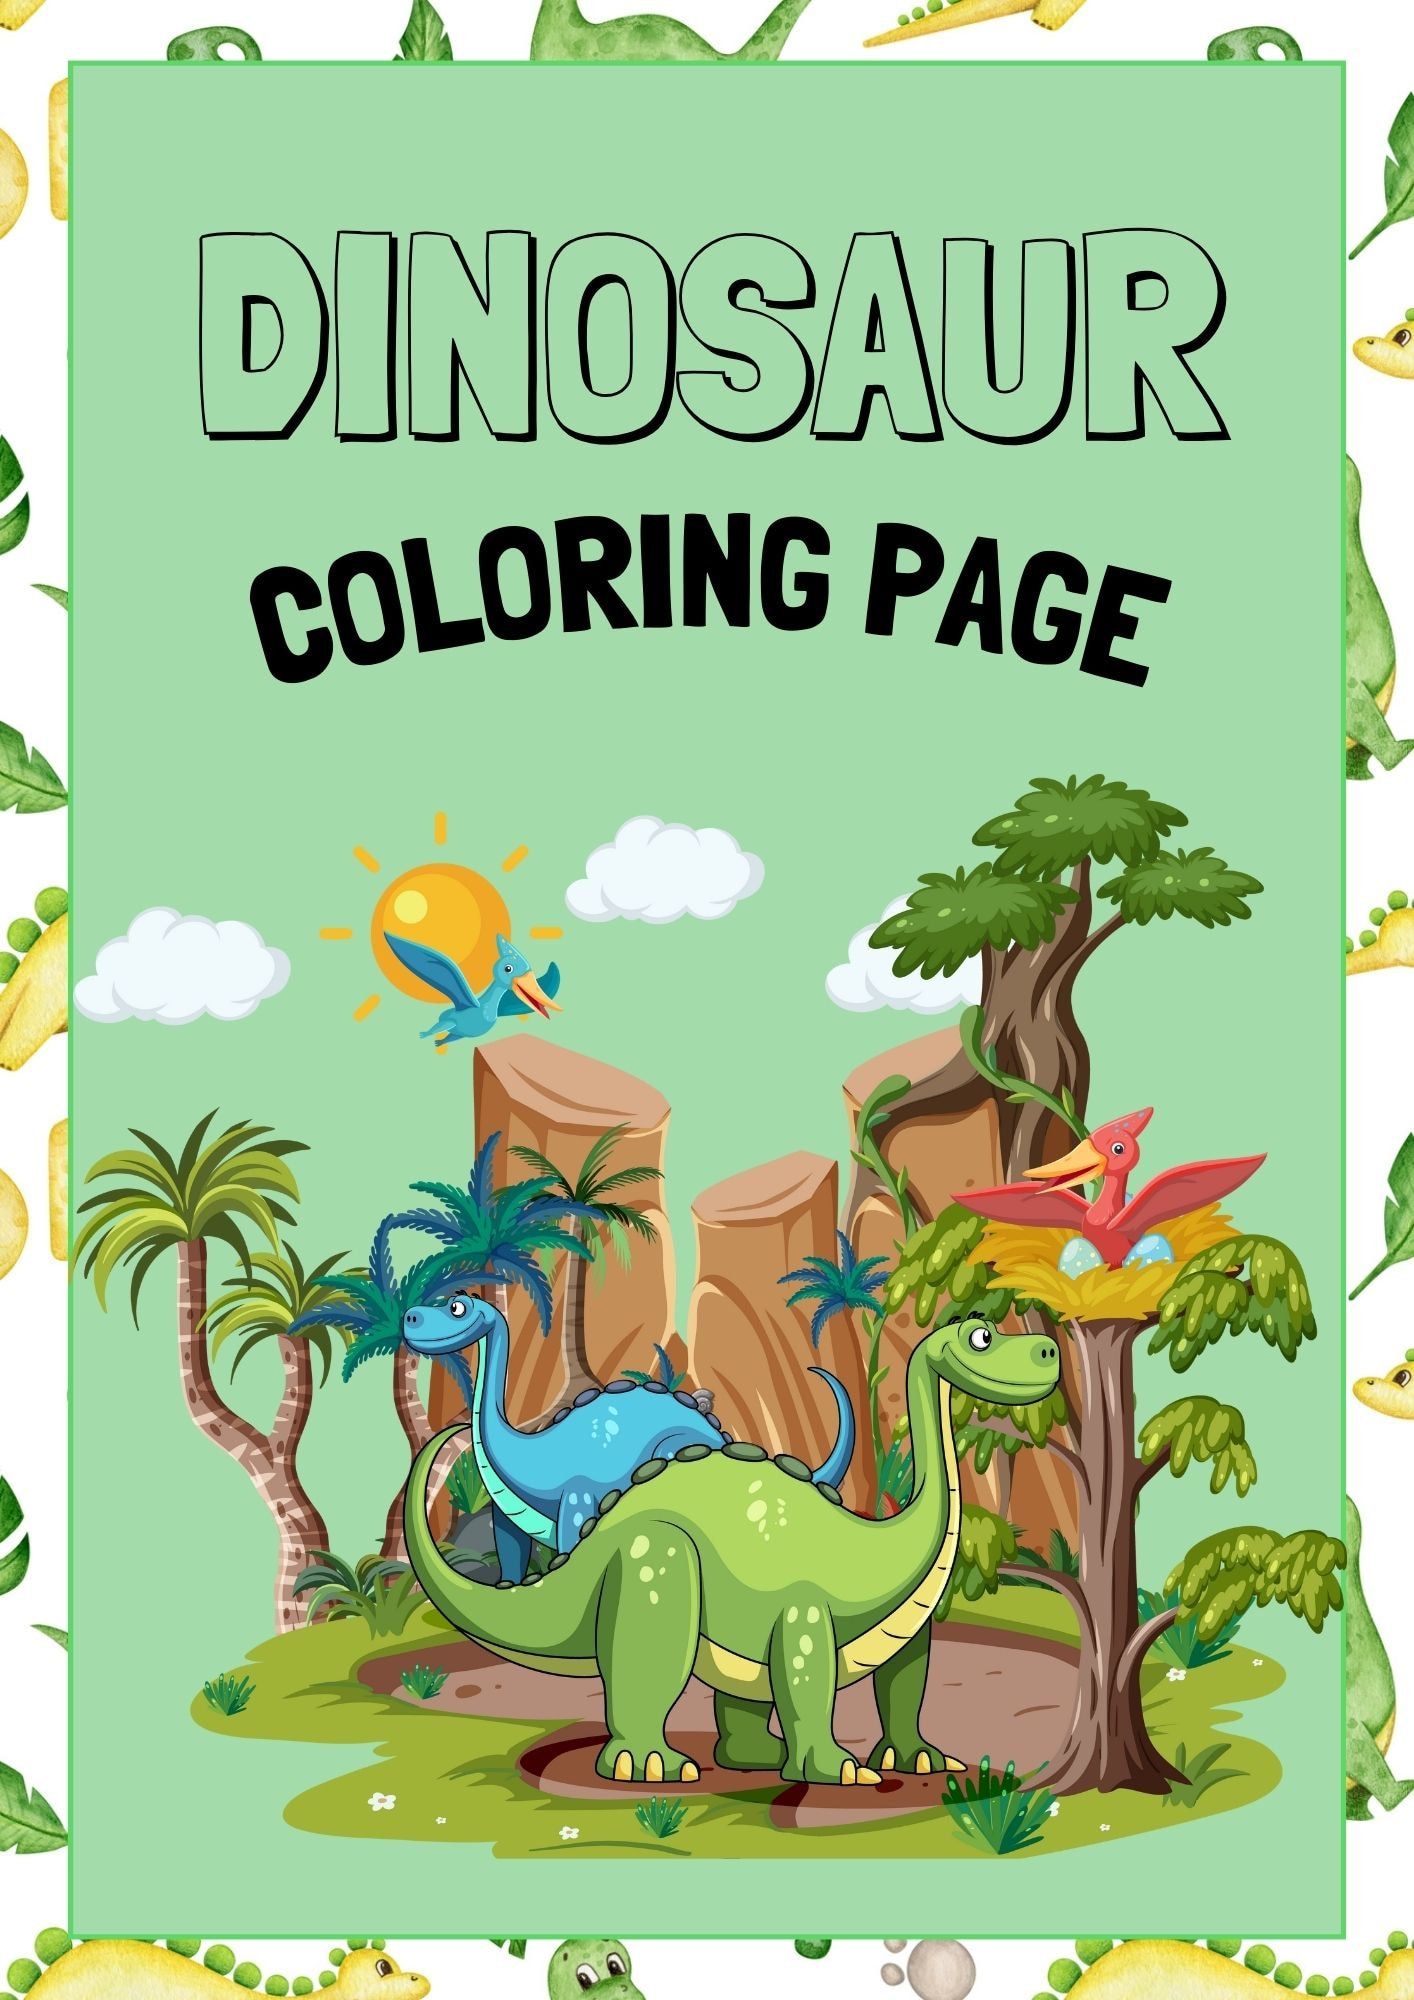 DINOSAUR COLORING PAGE | Digital Products Toddlers Book Children's Book Learning Books Dino Book Busy Books Coloring Therapy Printable Books